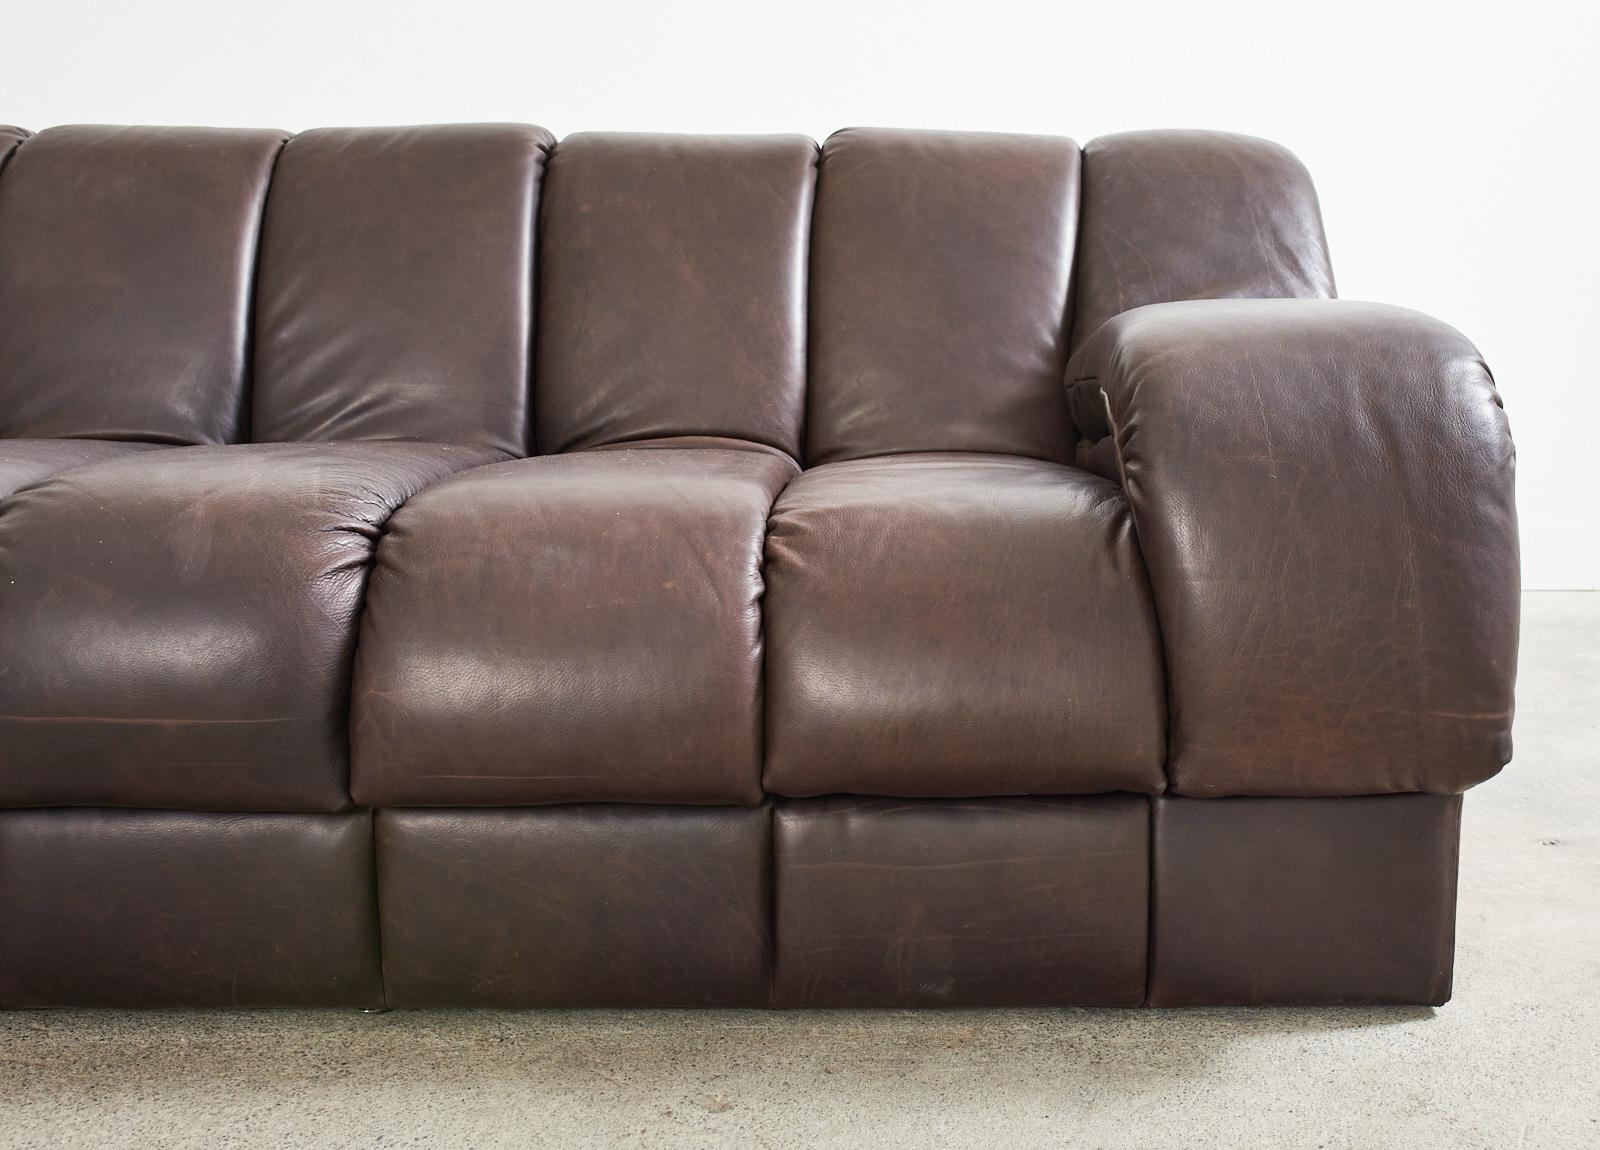 Monumental Steve Chase Monterey Style Channeled Leather Sofa 5